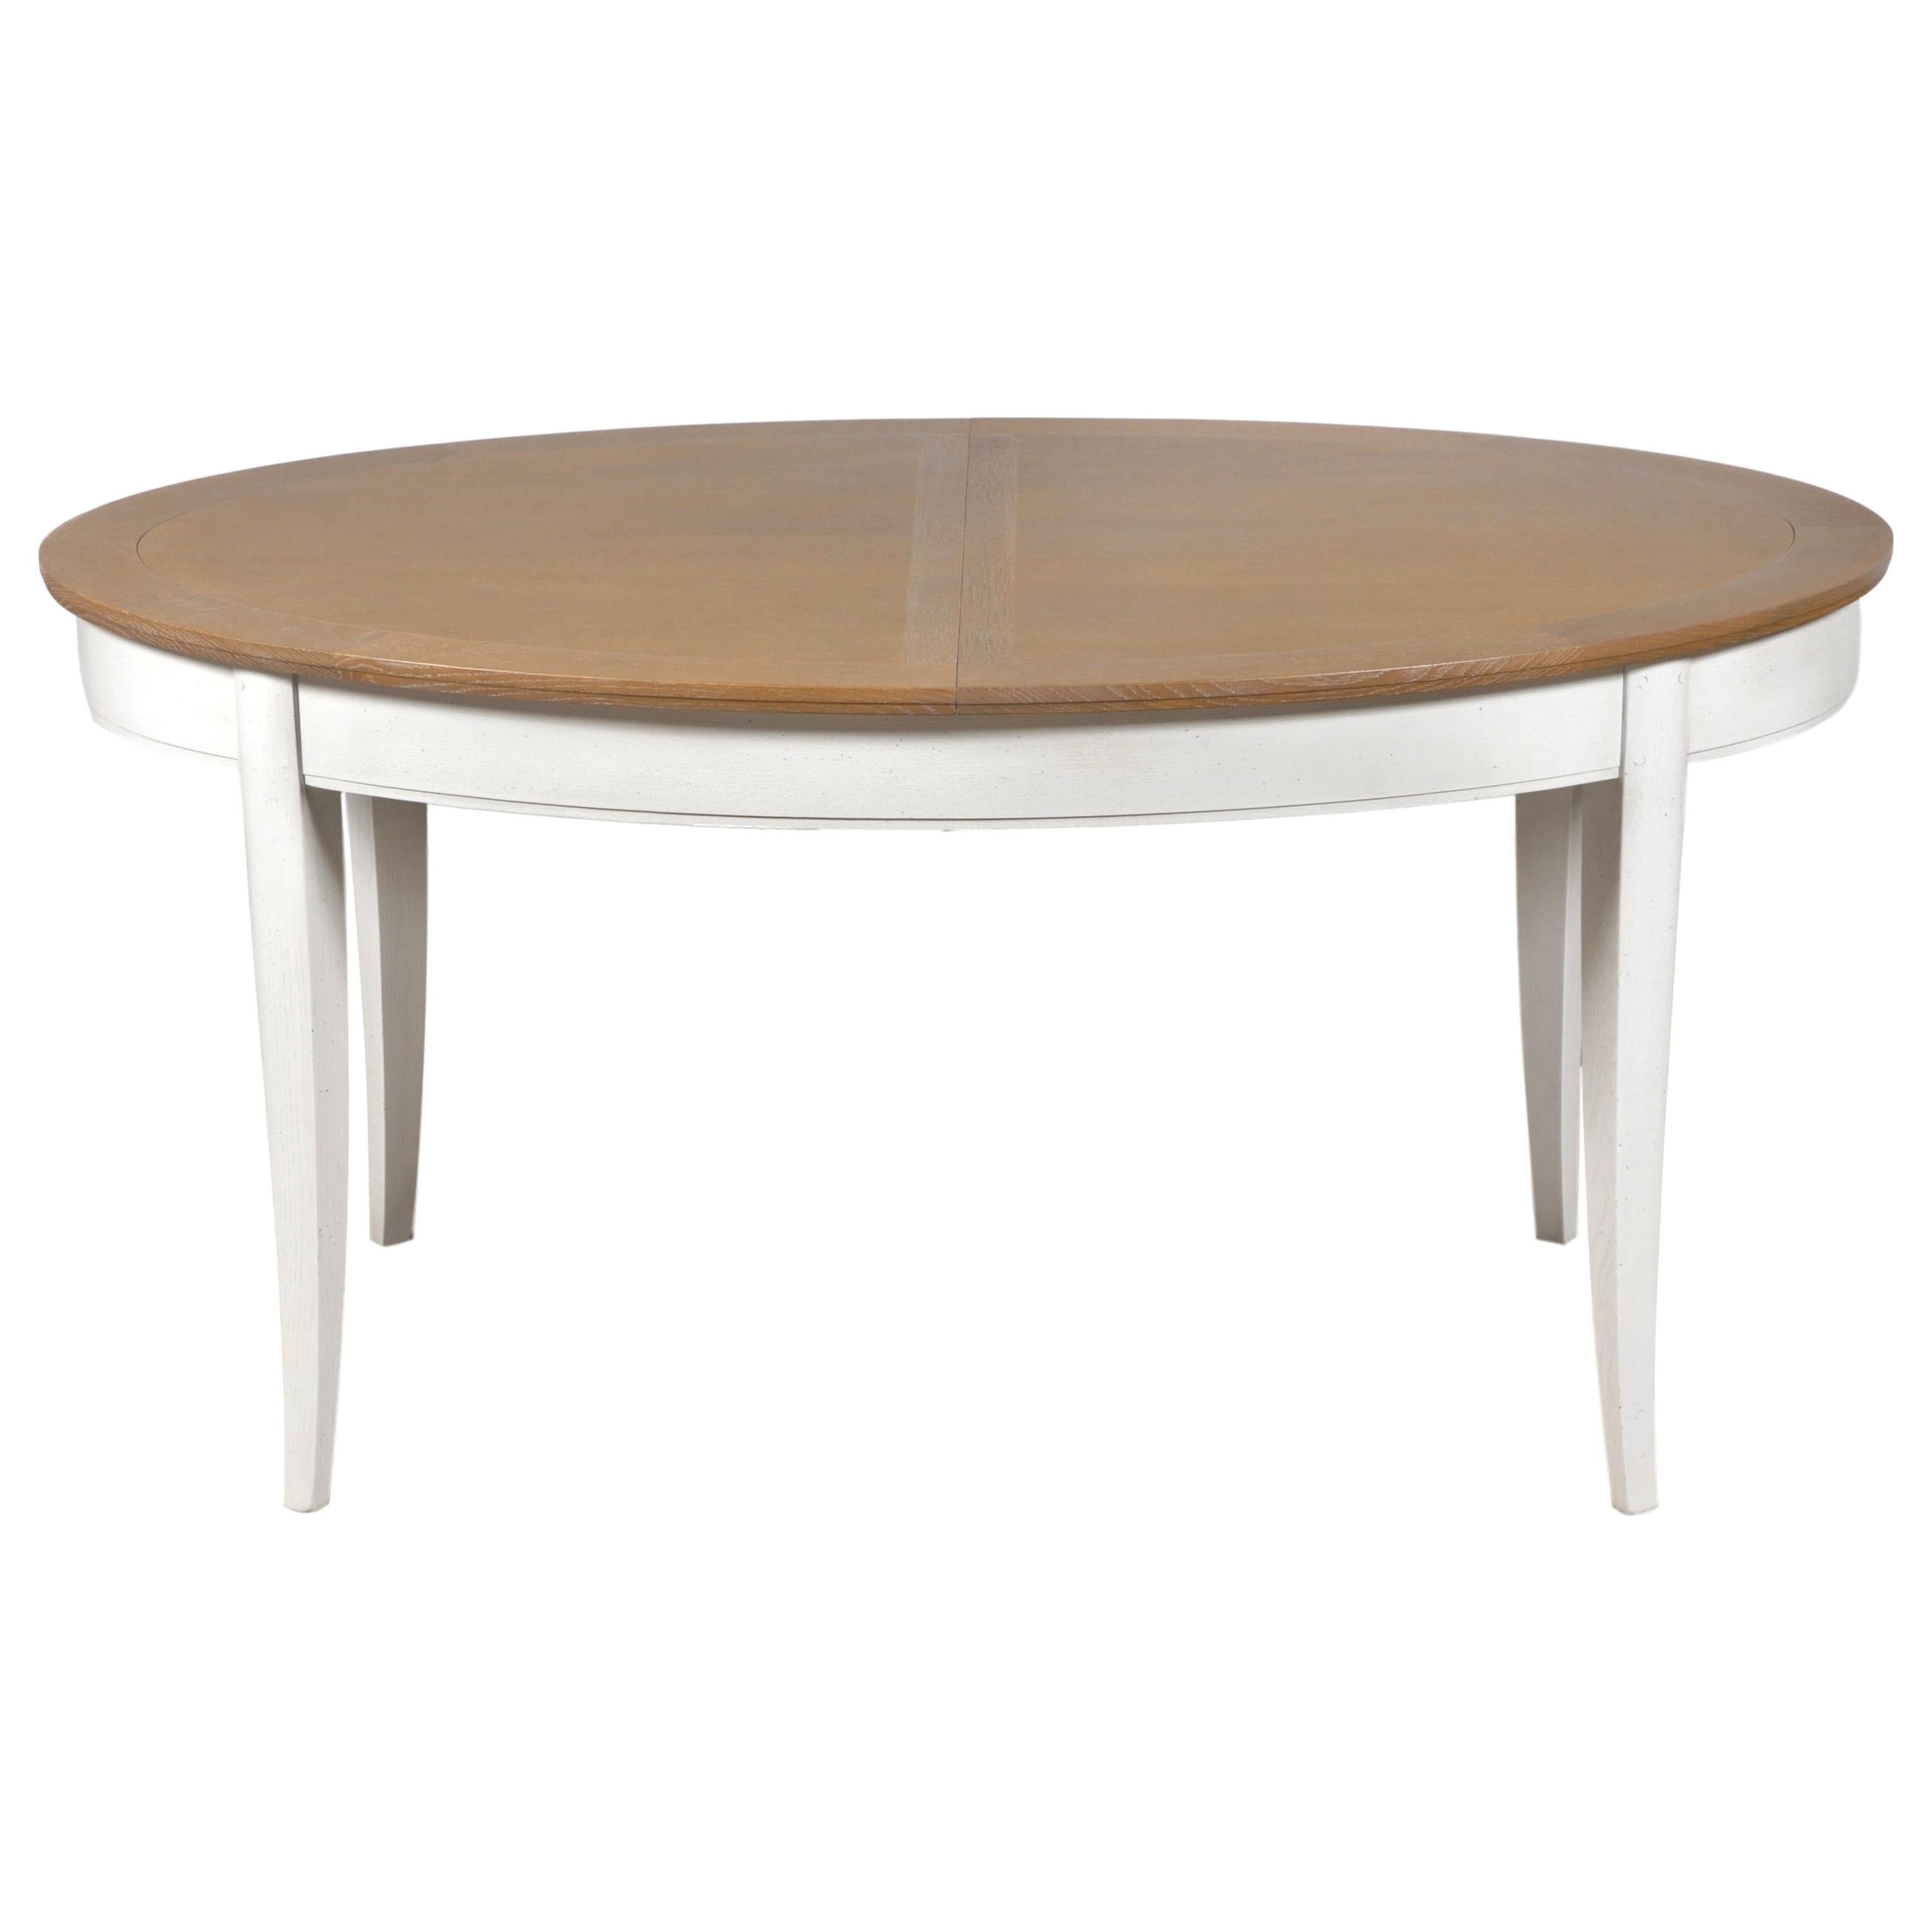 French Countryside Oak Table, 2 extensions, 10 guests, pearl-grey lacquered legs For Sale